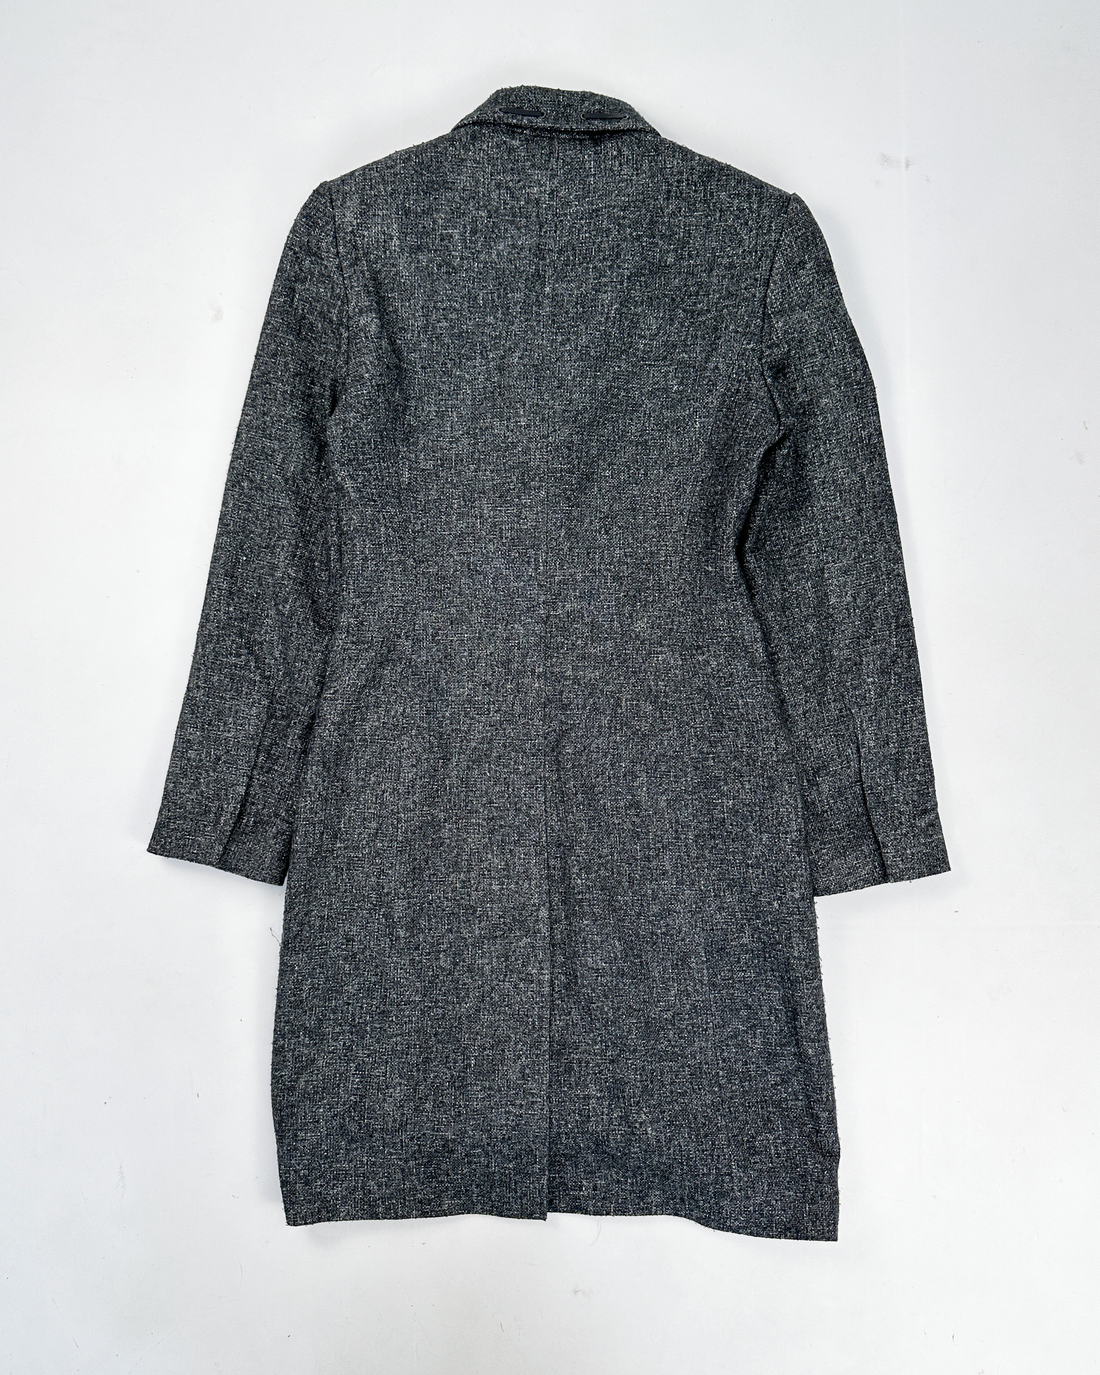 Paco Rabanne Laced Wool Grey Coat 2000's